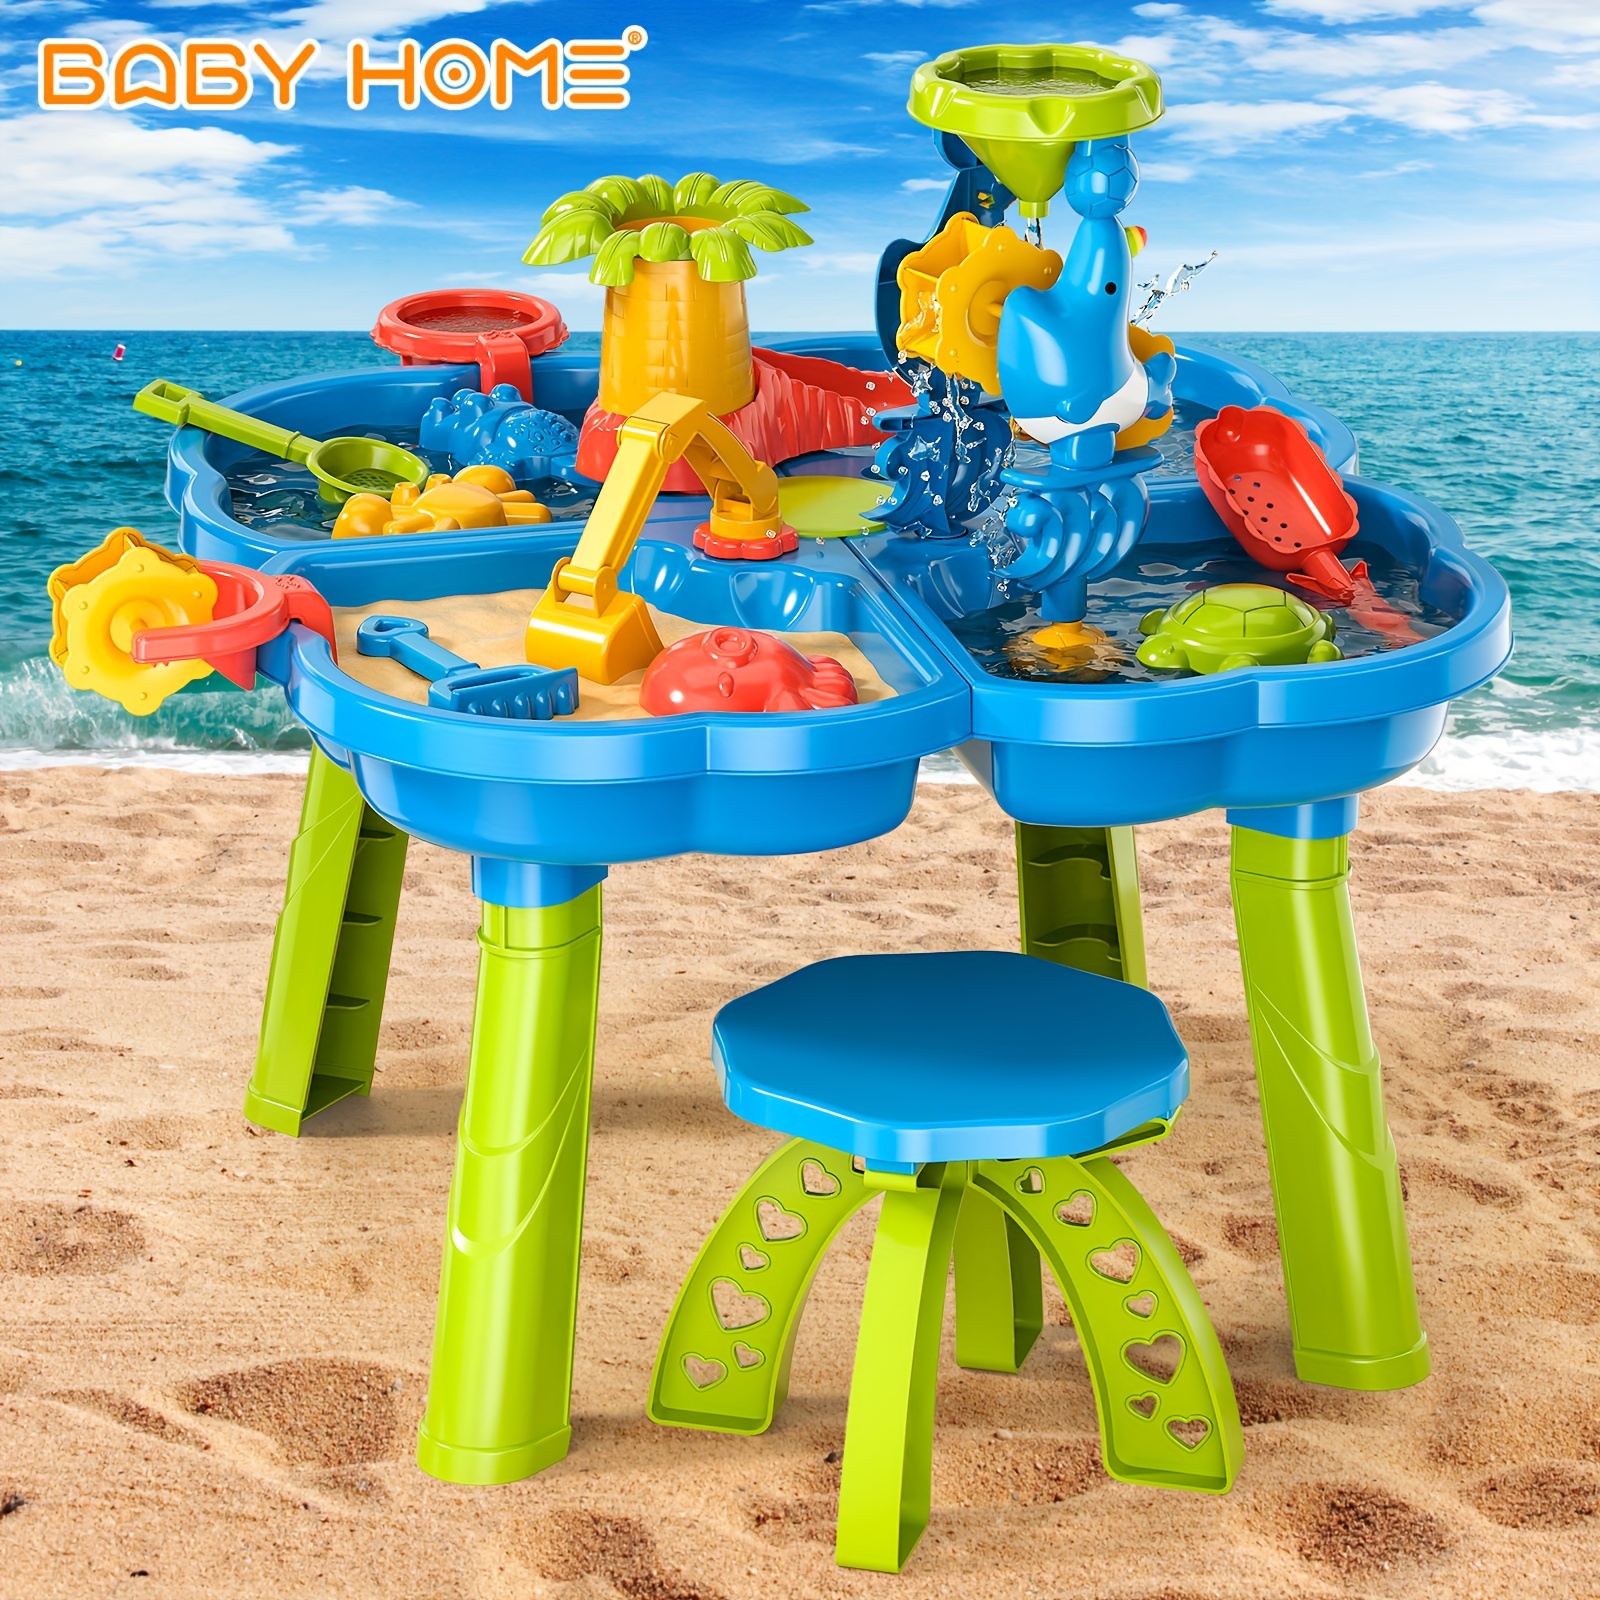 

Babyhome 4-in-1 Sand Water Table, Sandbox Table With Beach Sand Water Toy, Kids Activity Sensory Play Table Summer Outdoor Toys Color Random